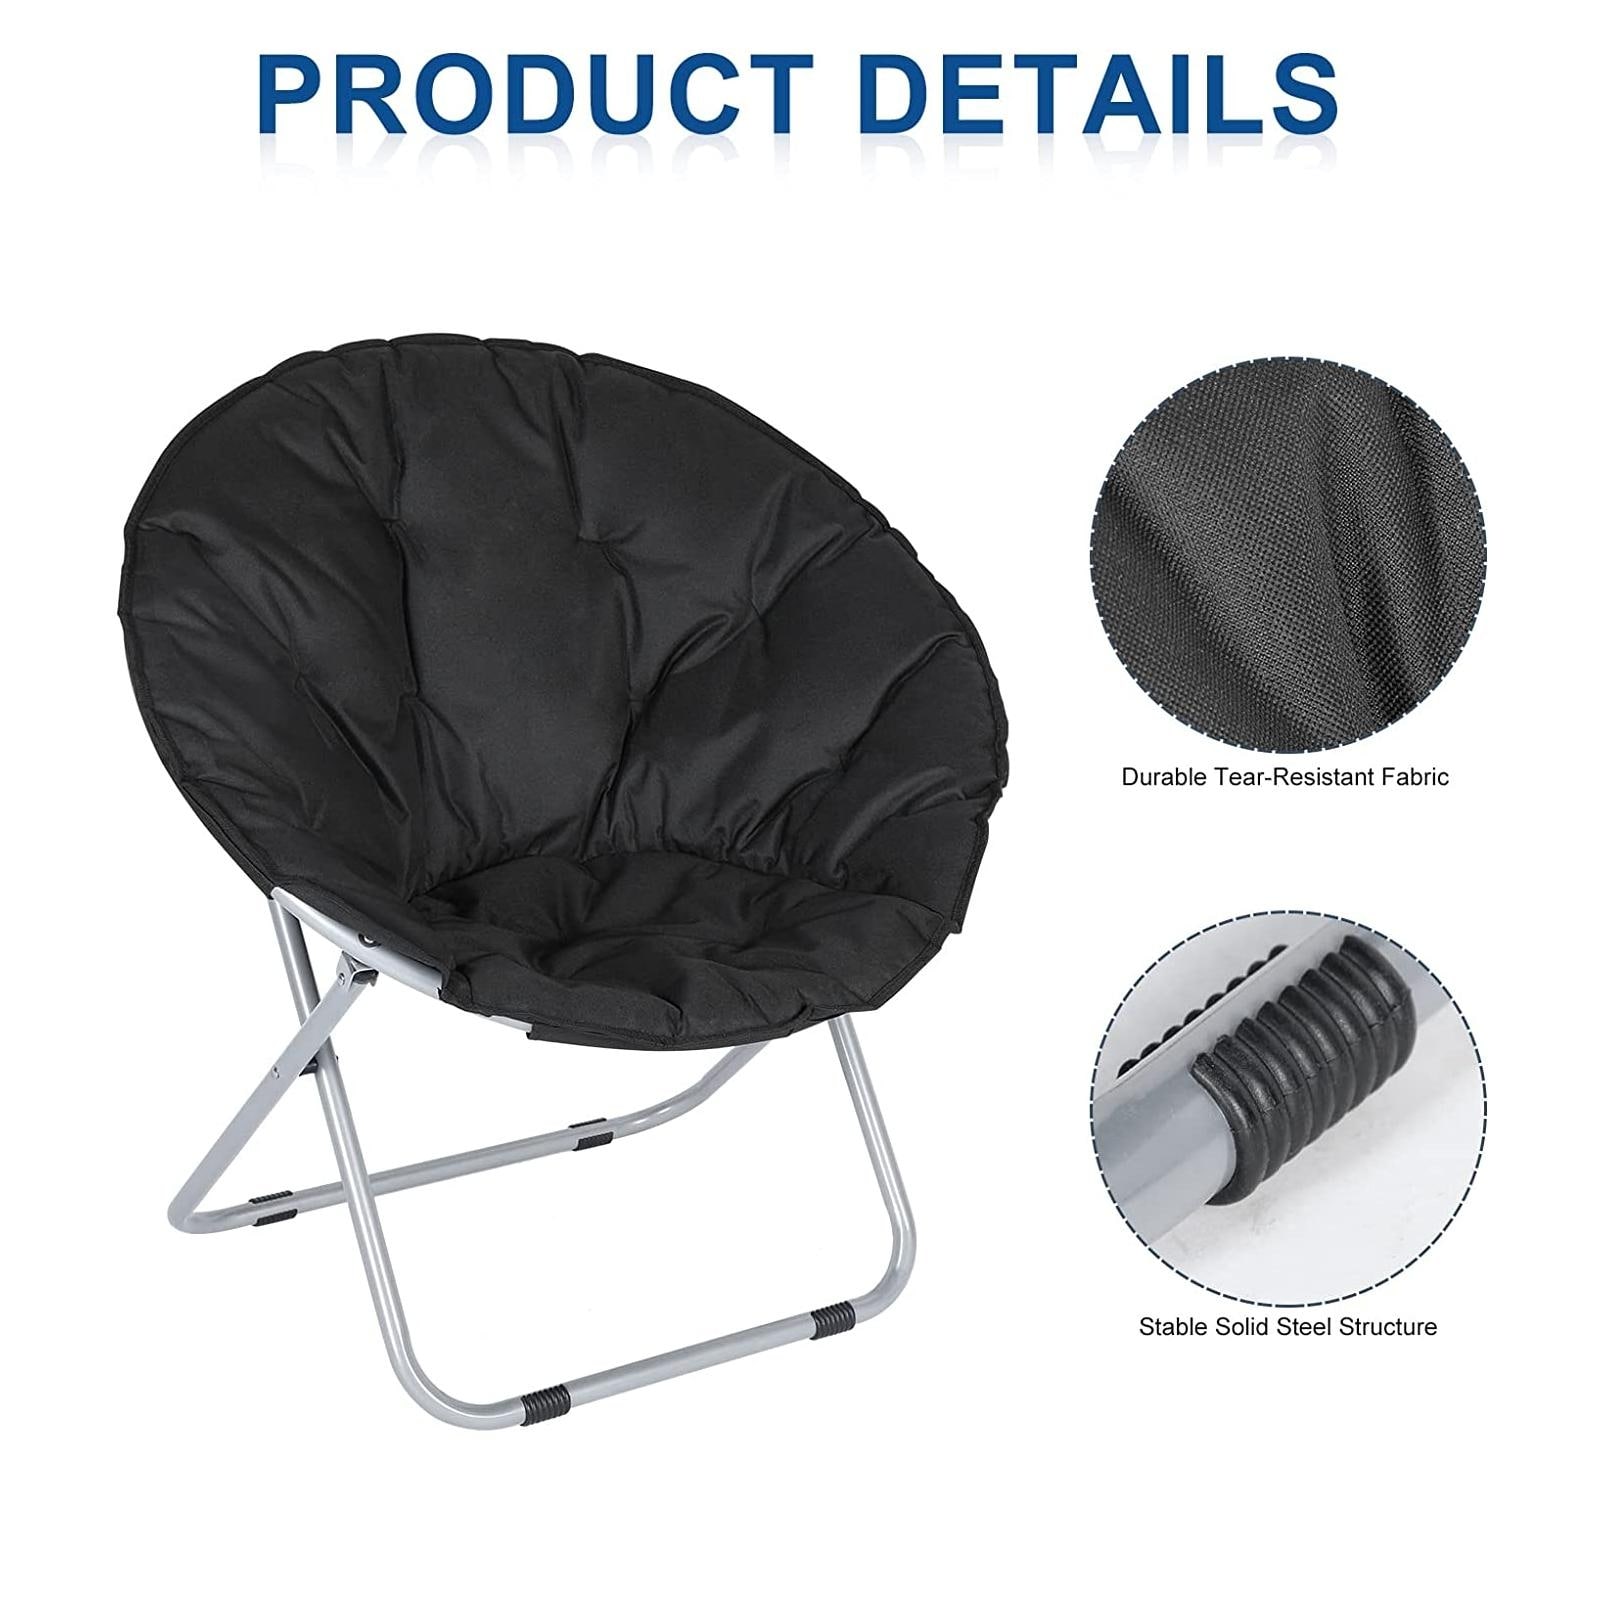 Black Comfy Saucer  Folding  Soft  Portable Moon Chair For Garden And Courtyard  1-pack